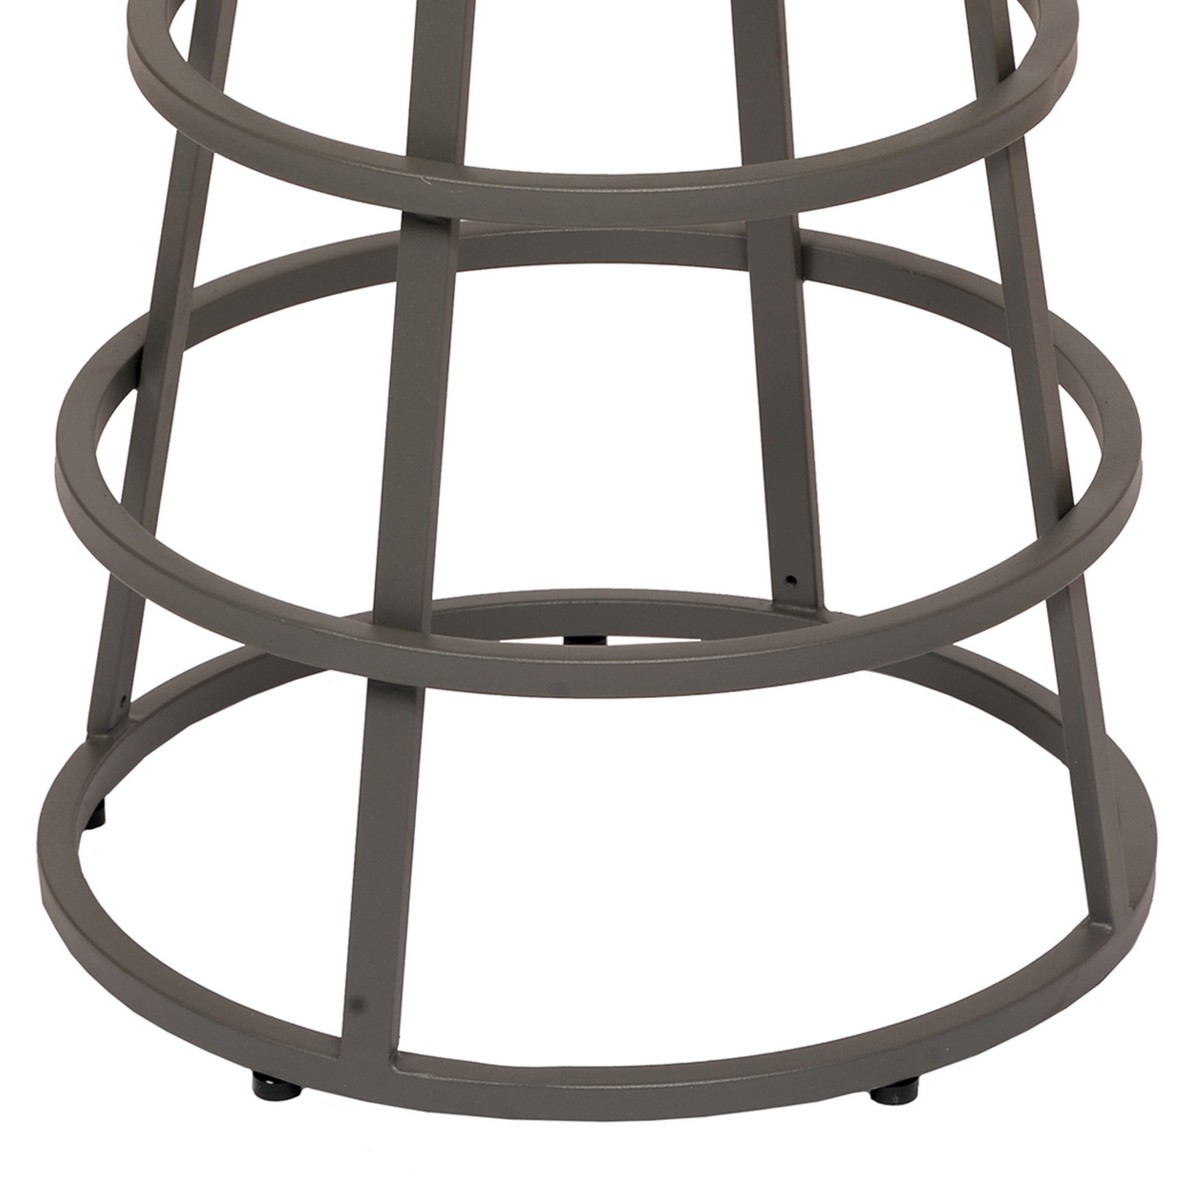 Armen Living Ringo 26-inch Backless Gray Metal Barstool in Gray Leatherette